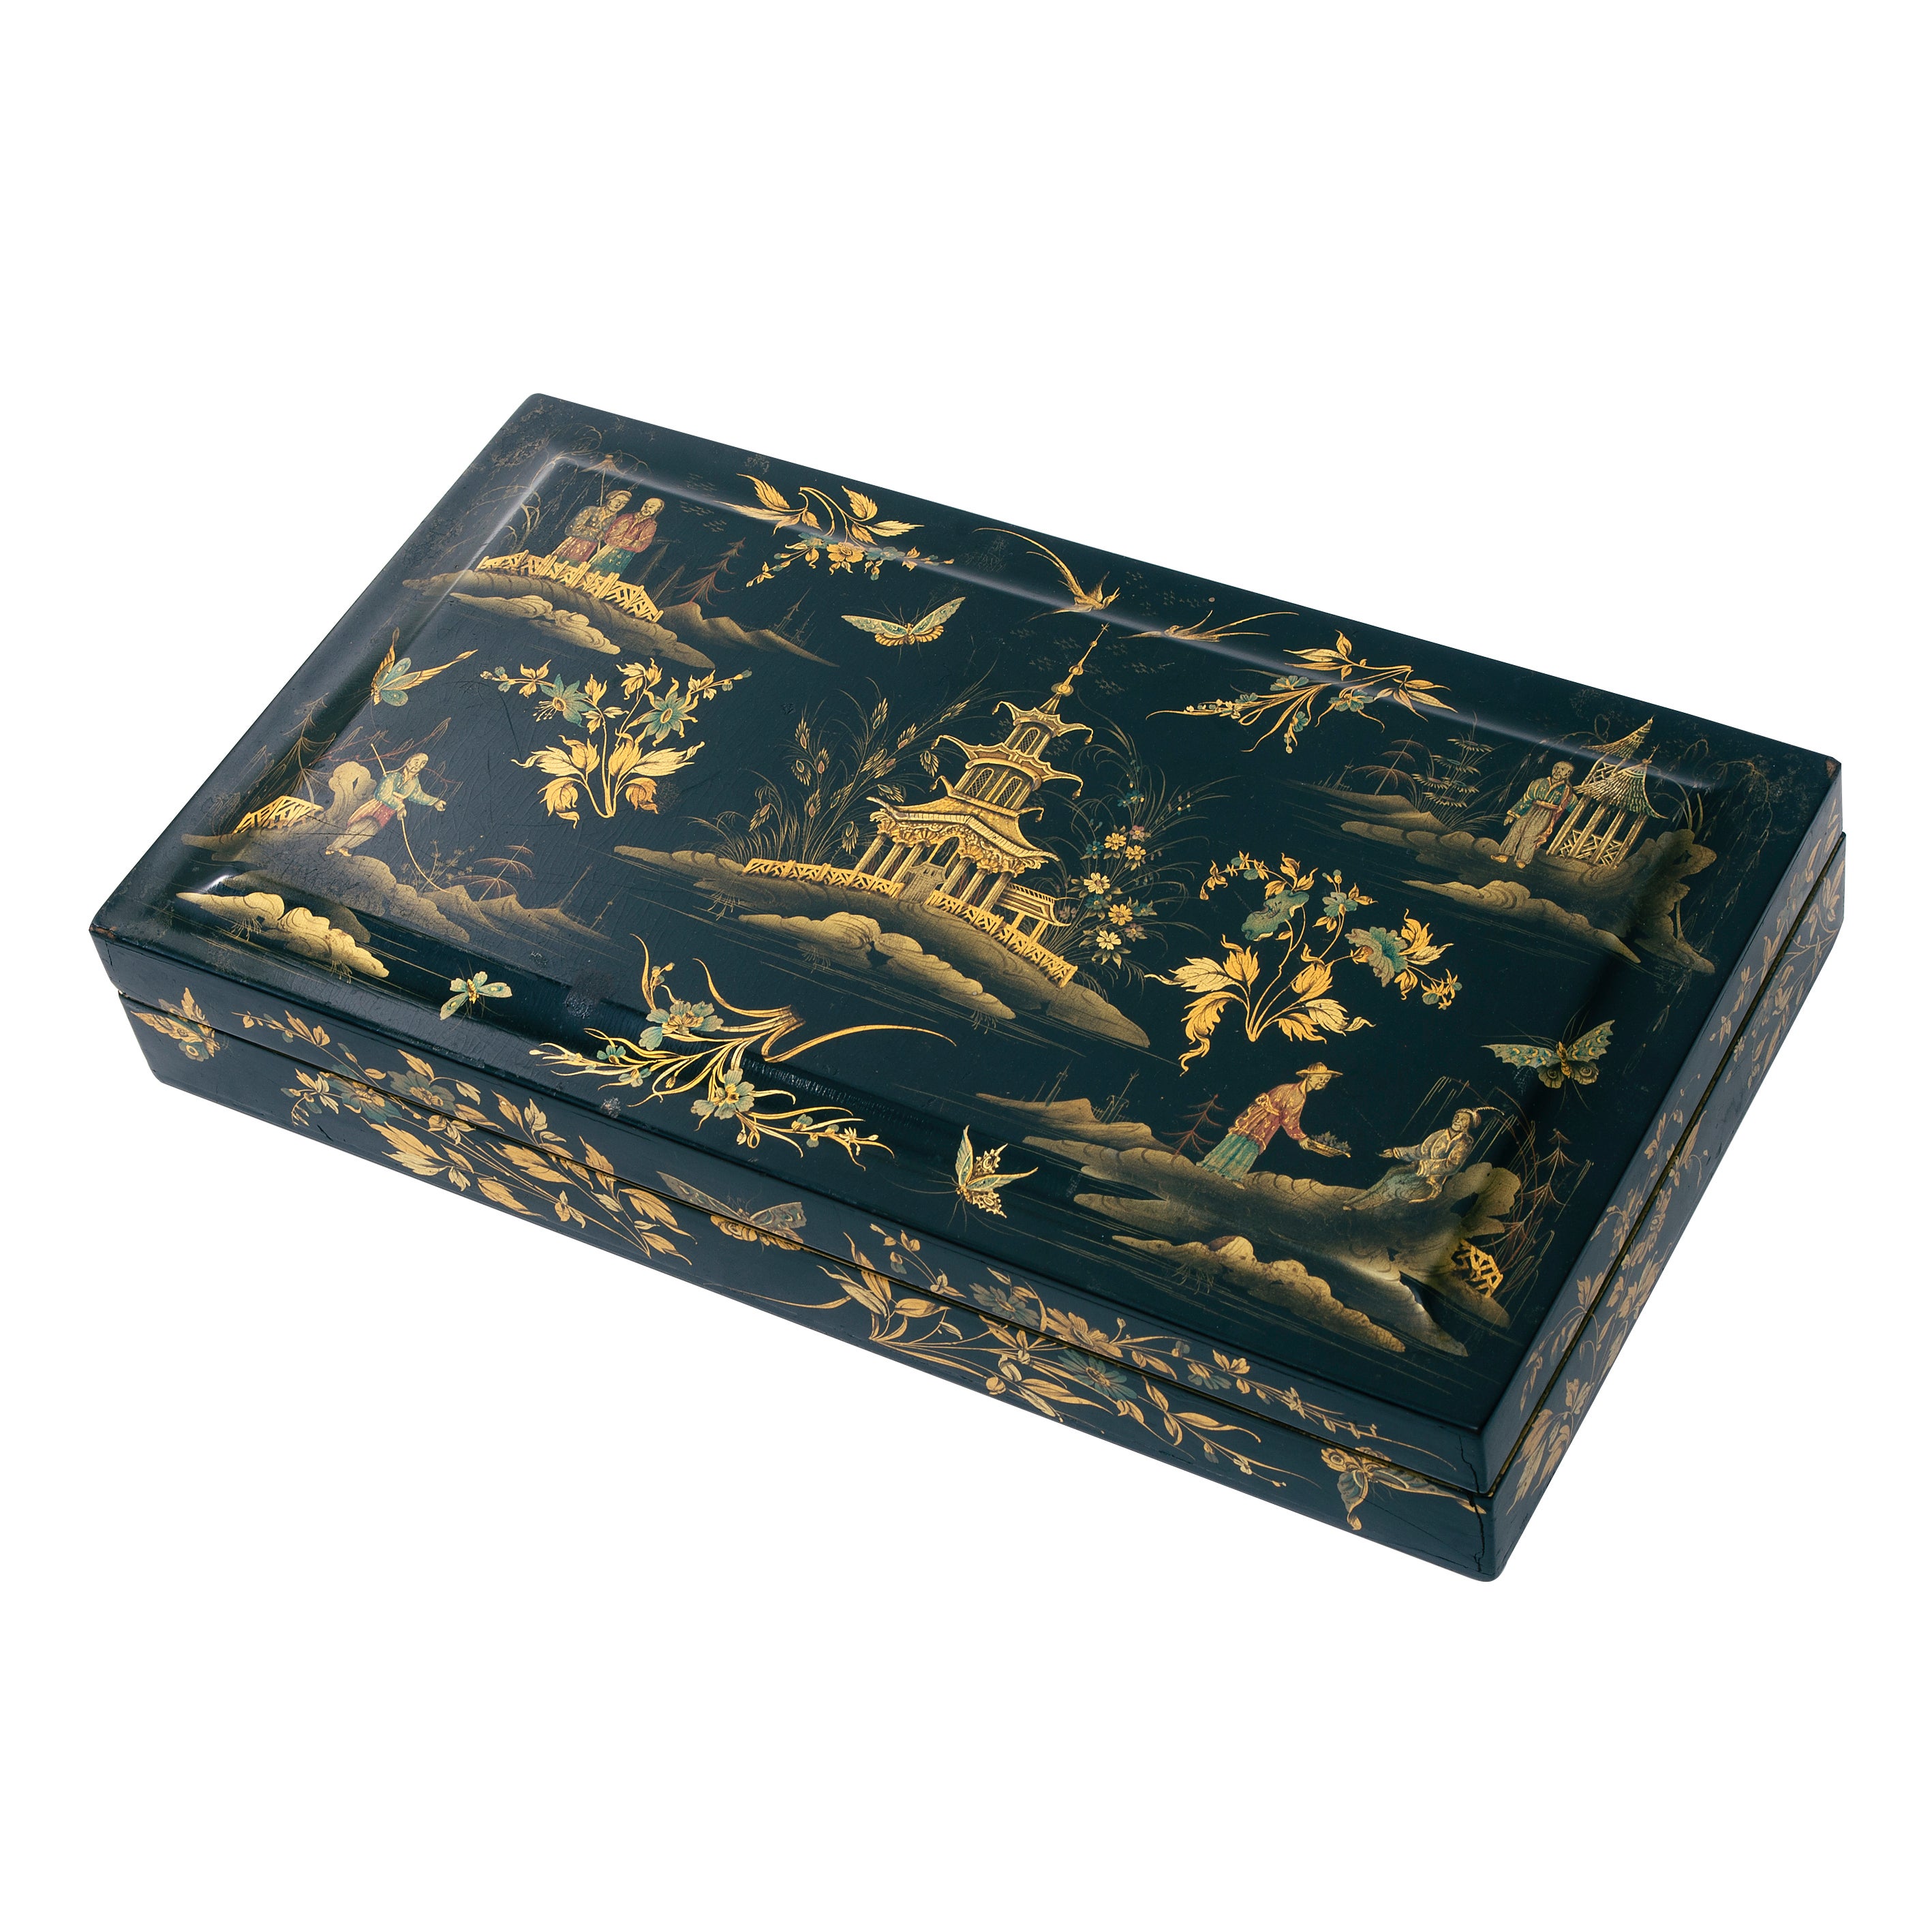 Early Victorian Chinoiserie Papier Mache Lacquered Box c.1840